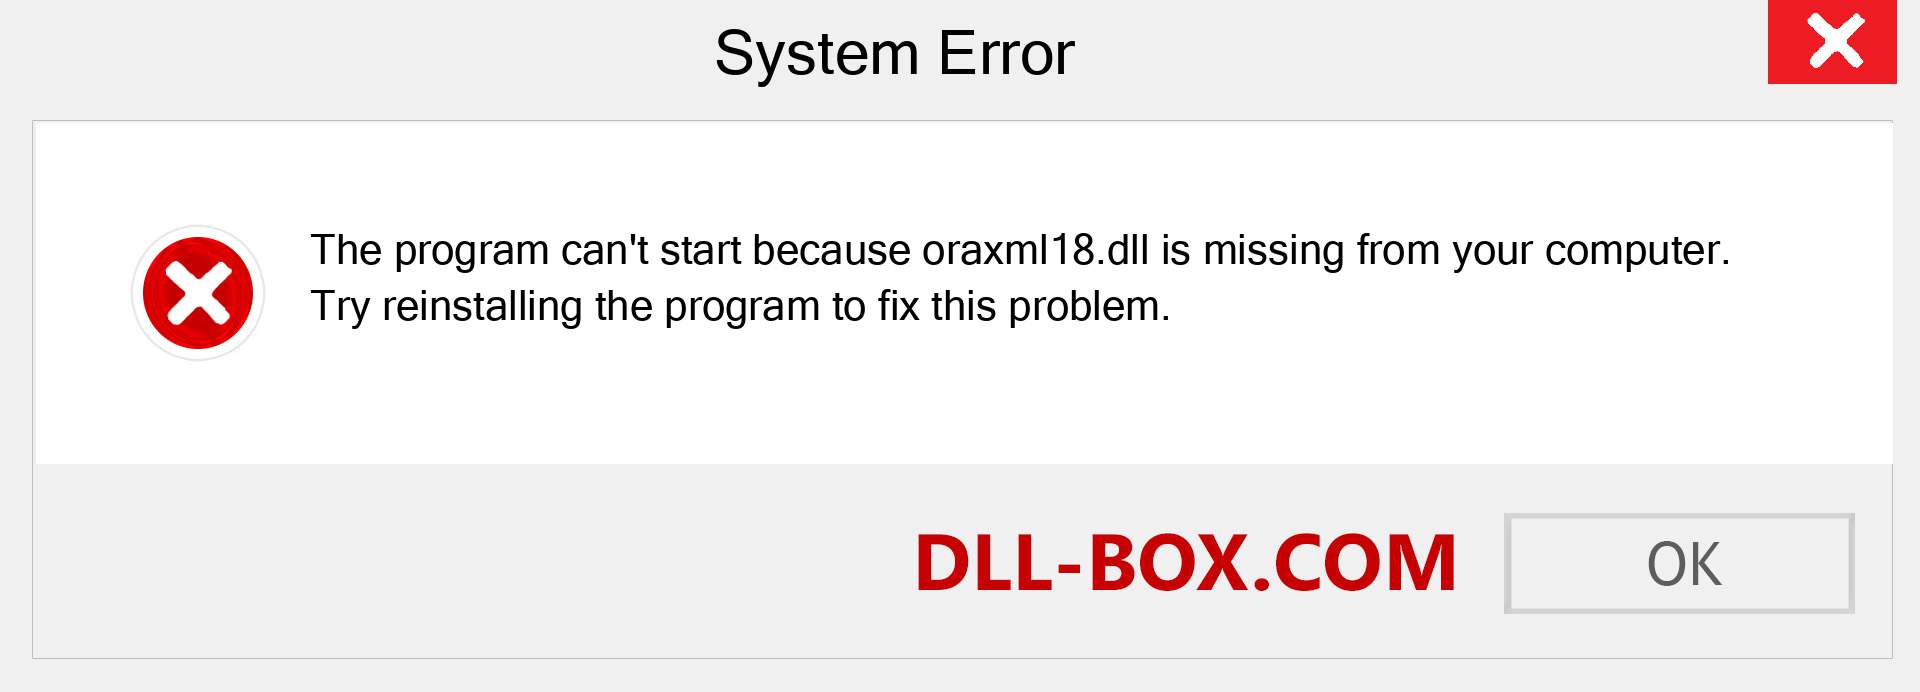  oraxml18.dll file is missing?. Download for Windows 7, 8, 10 - Fix  oraxml18 dll Missing Error on Windows, photos, images